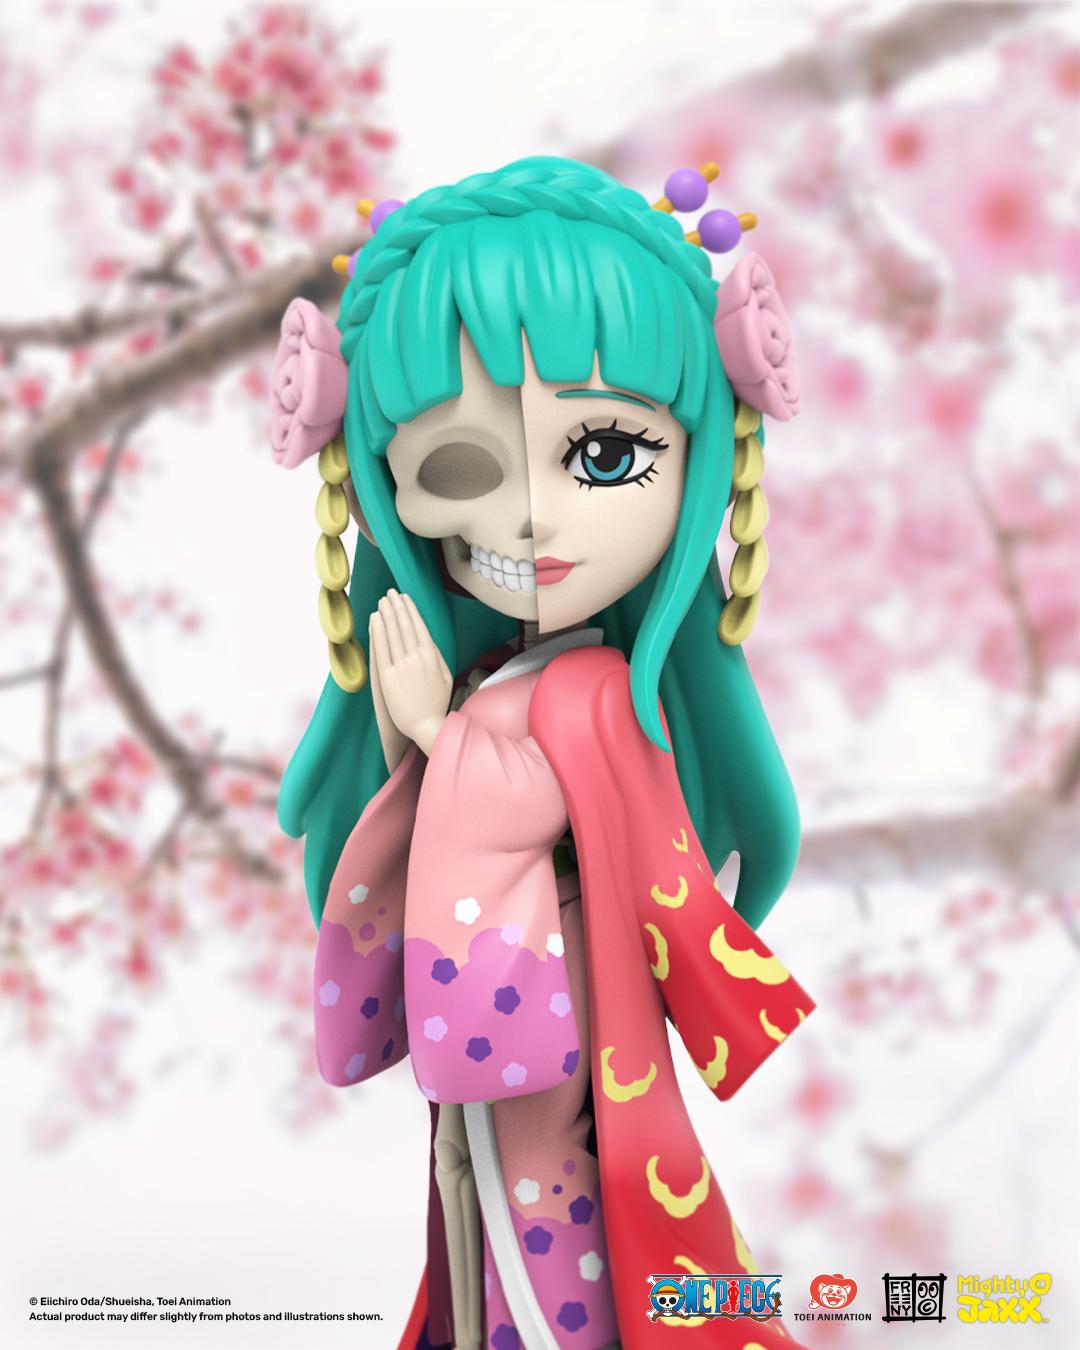 A picture containing doll, toy, cartoon, figurine

Description automatically generated